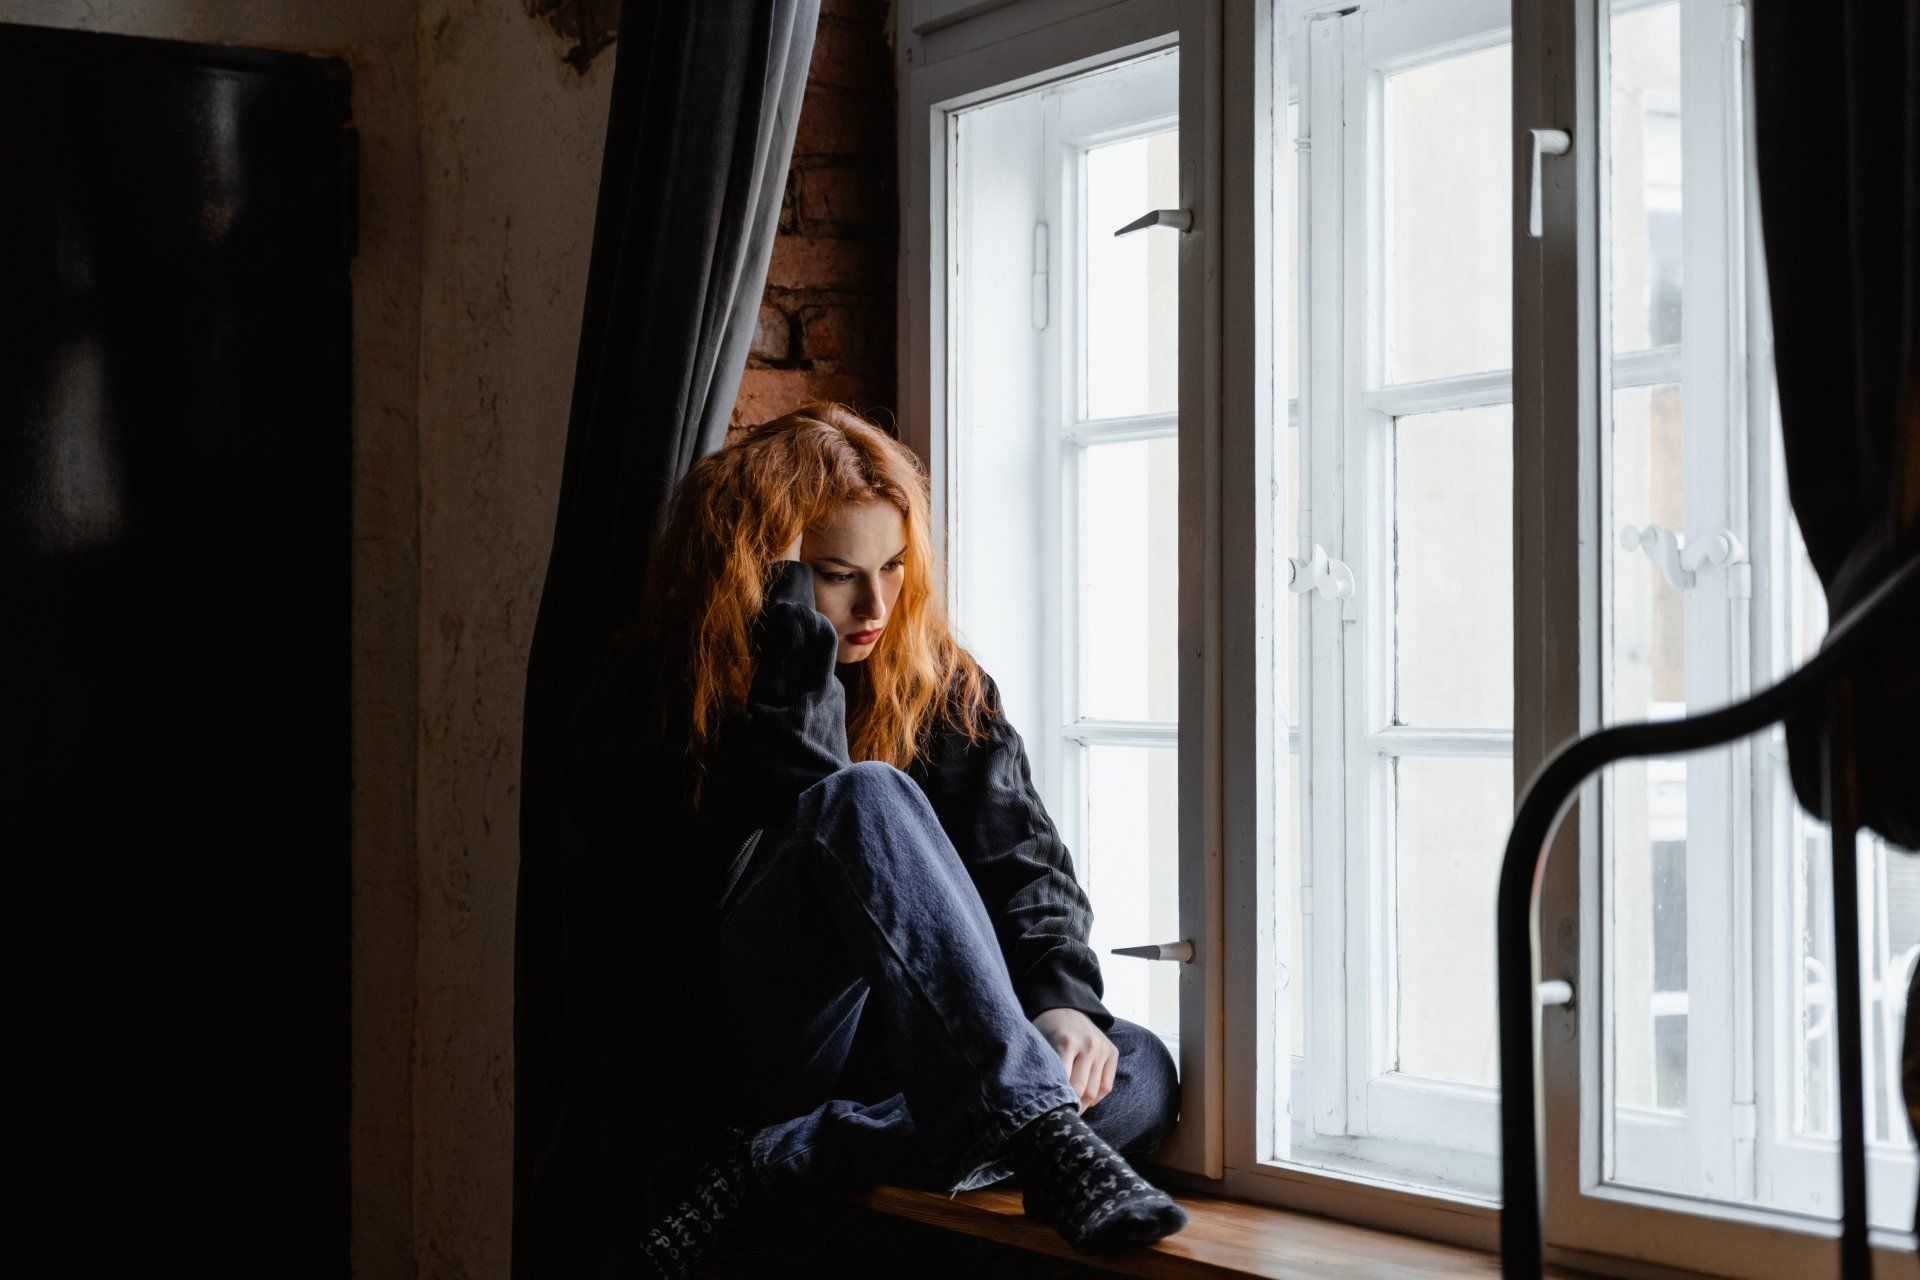 A distraught woman sitting by a window, her gaze heavy with the emotional burden of coping with a family member's hoarding behavior.